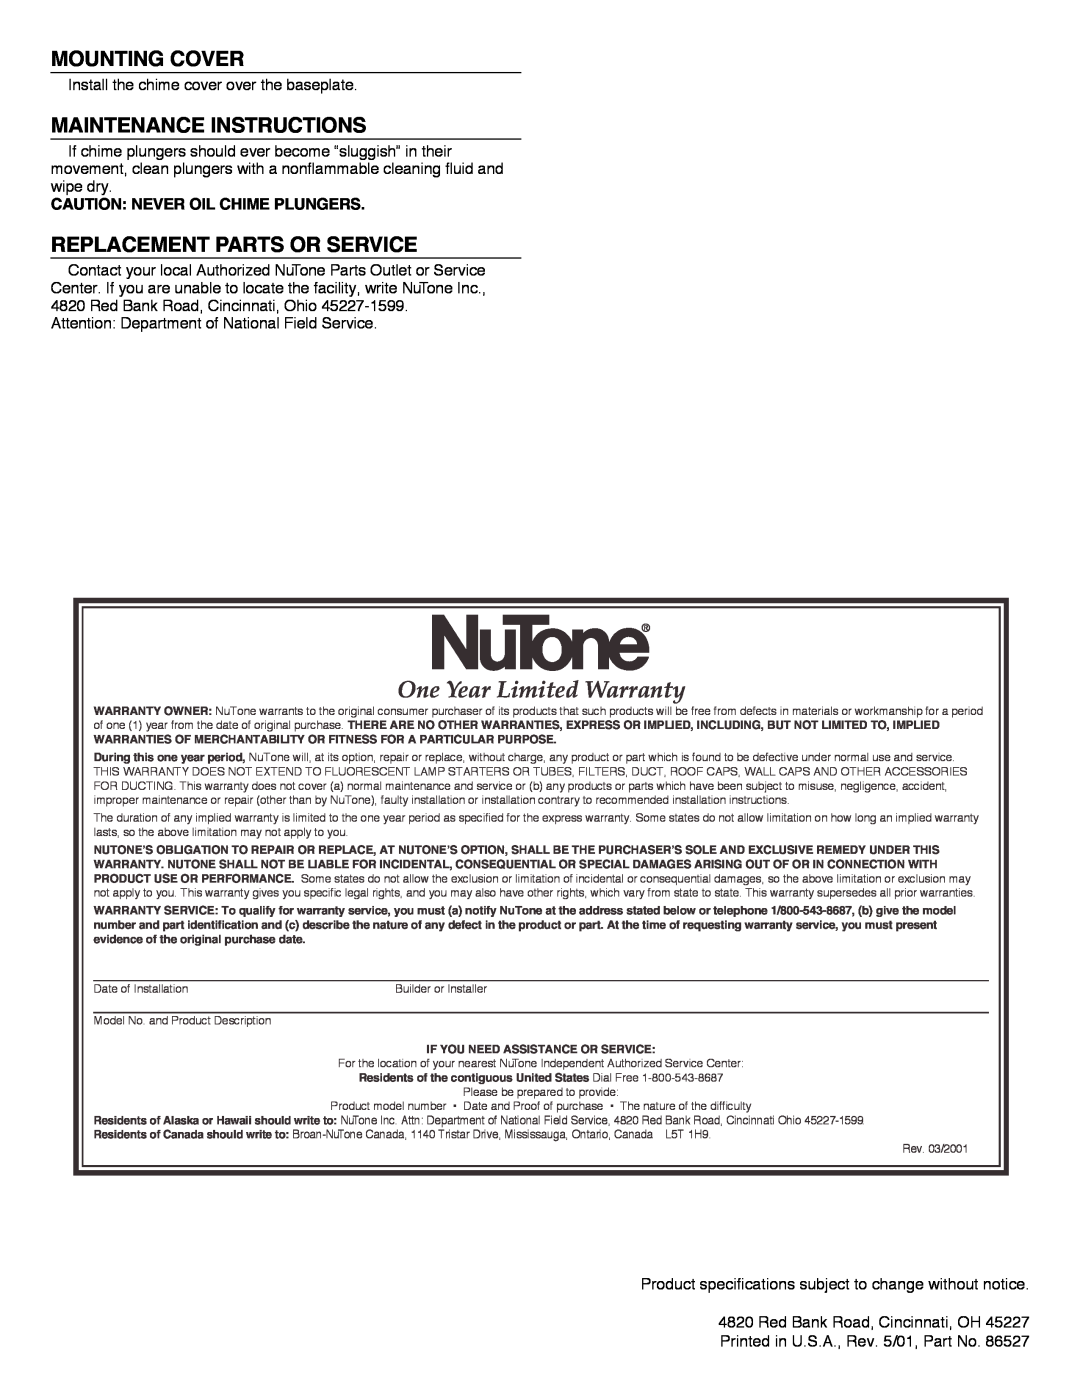 NuTone LA-165, LA-156PR One Year Limited Warranty, Mounting Cover, Maintenance Instructions, Replacement Parts Or Service 